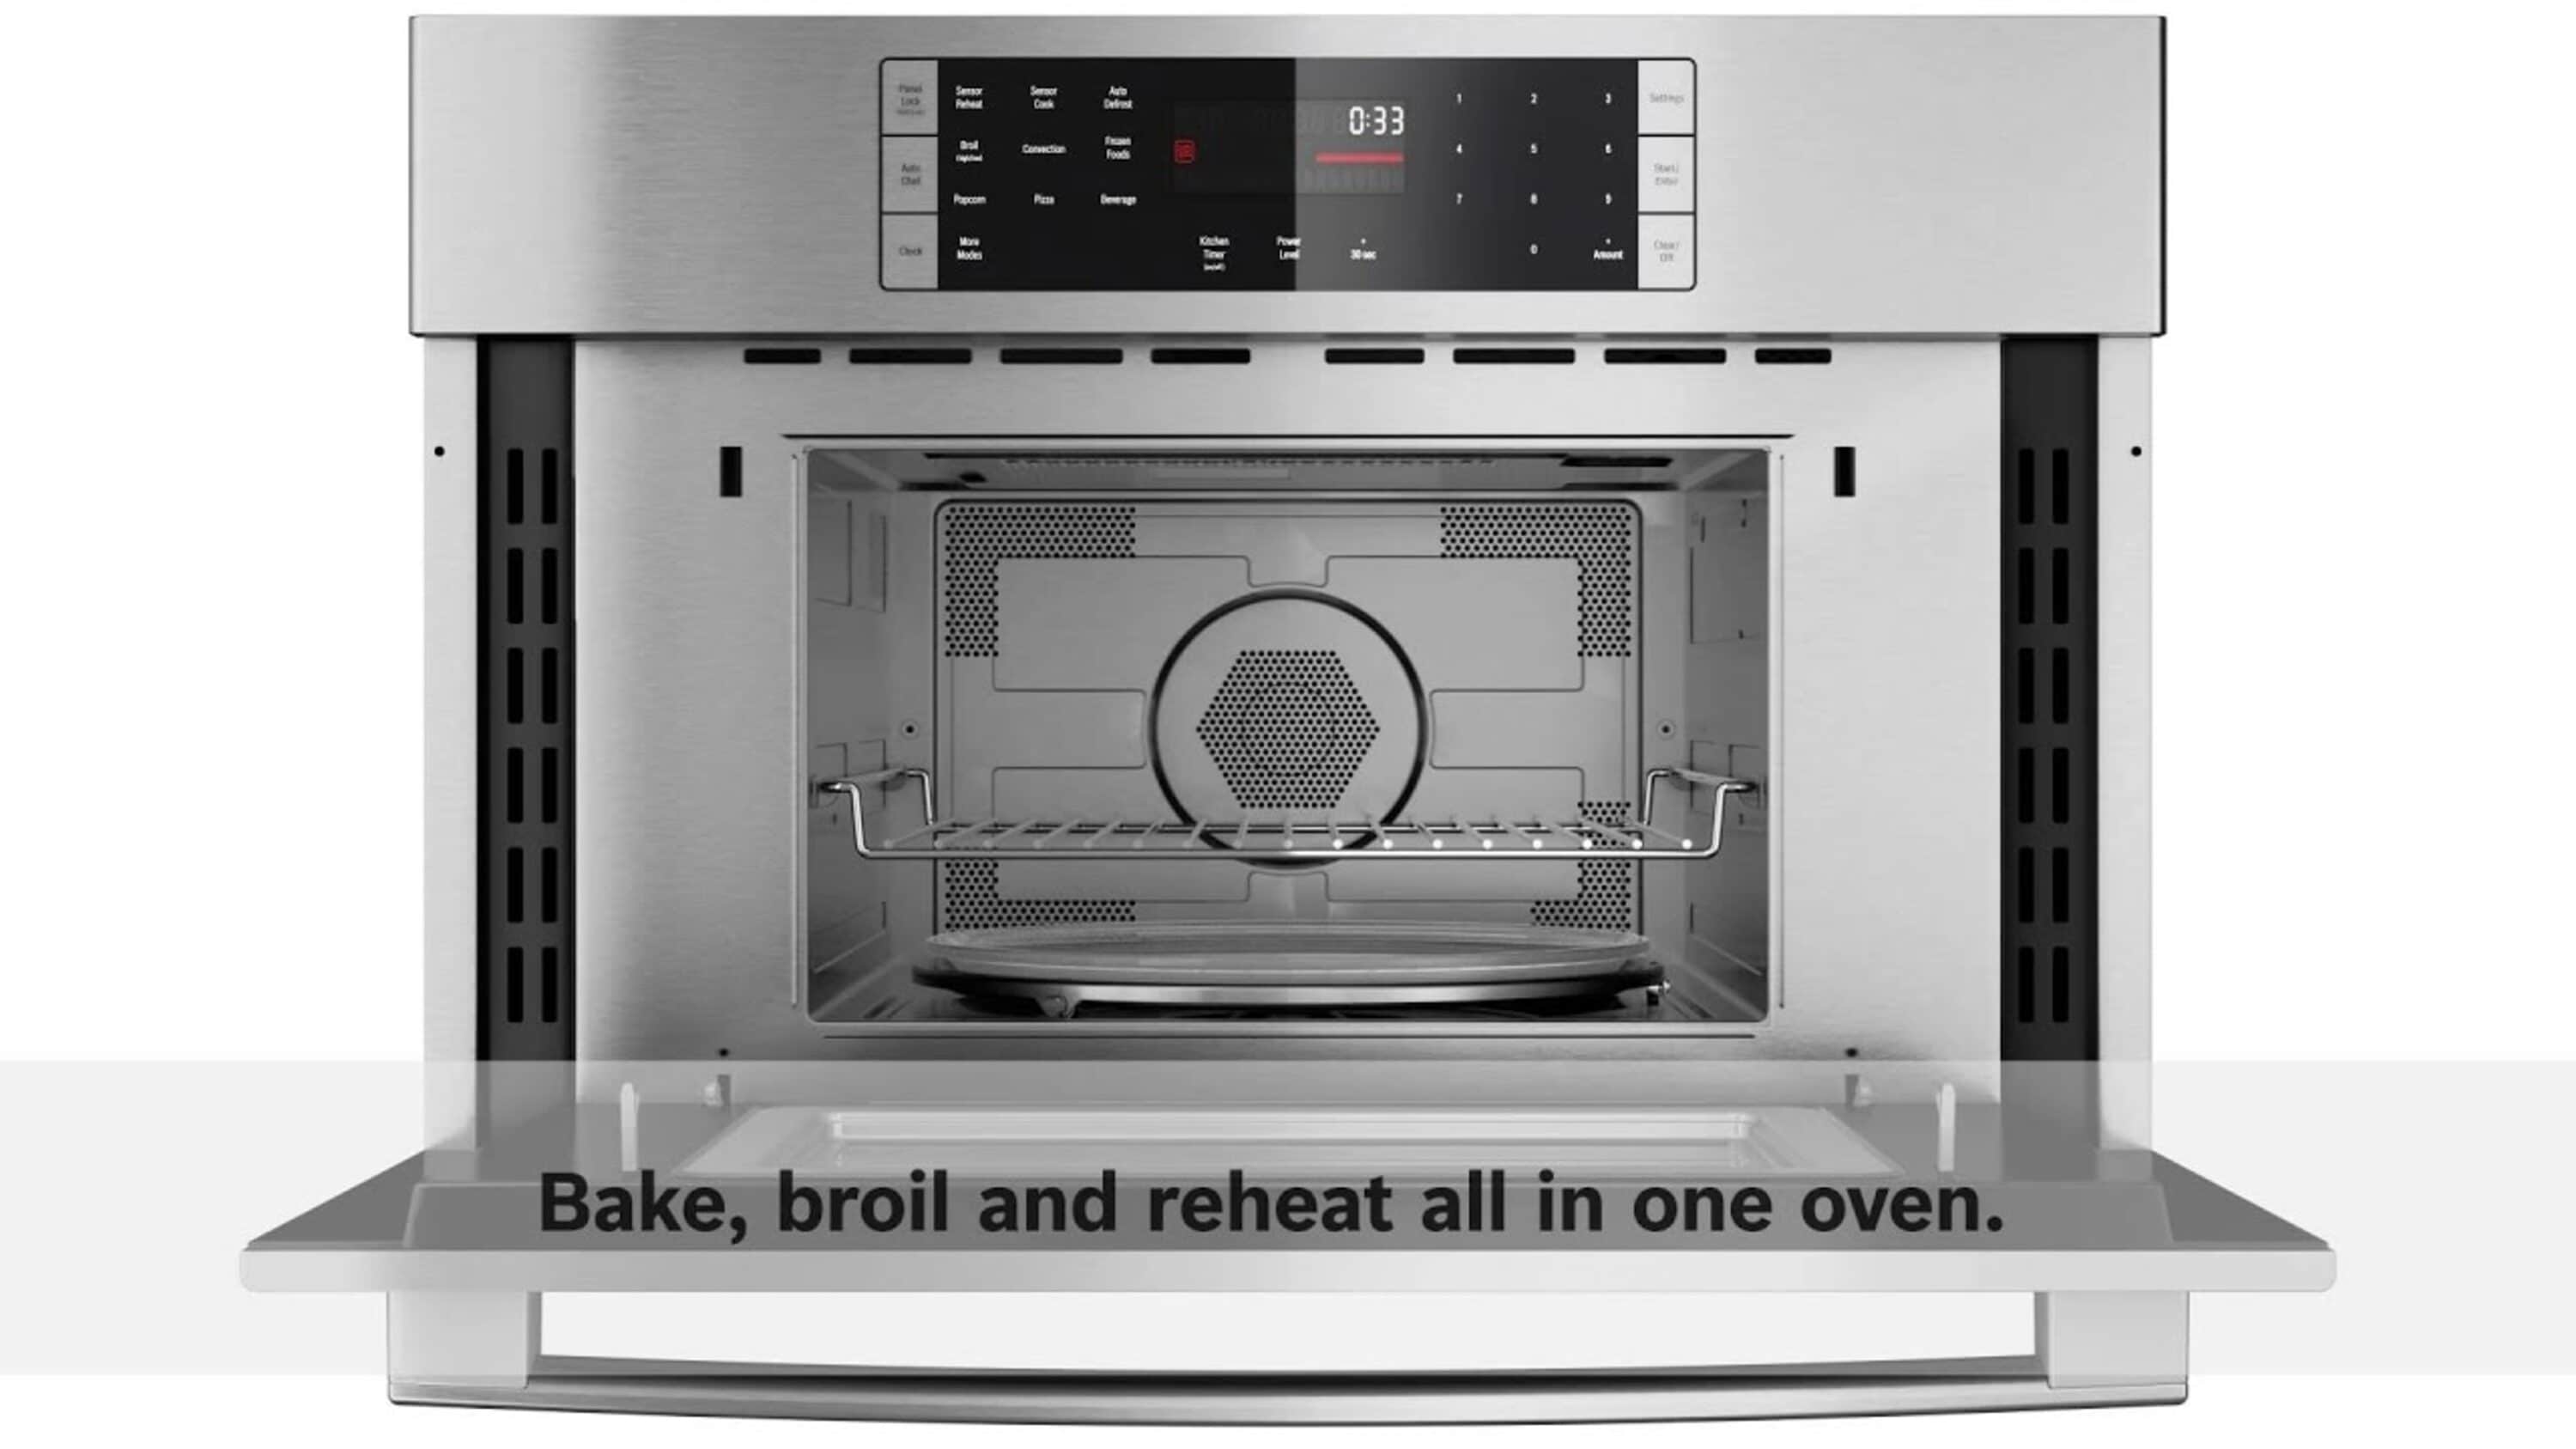  HMC54151UC 24 500 Series Speed Convection Oven with 1.6 cu. ft.  Capacity Stainless Steel Cavity 9 SpeedChef Cooking Modes 10 Microwave  Power Levels Kitchen Timer and Childlock in Stainless Steel : Home & Kitchen